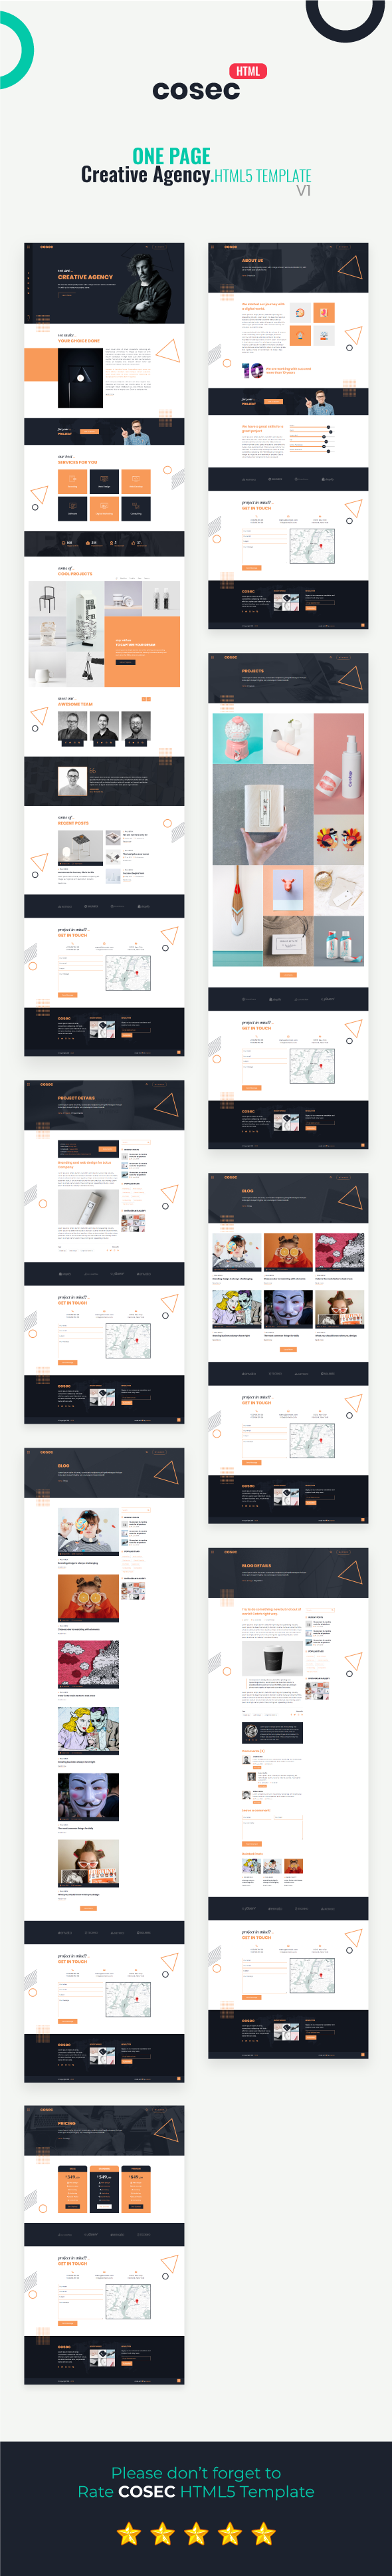 Cosec - One Page Creative Agency HTML5 Template